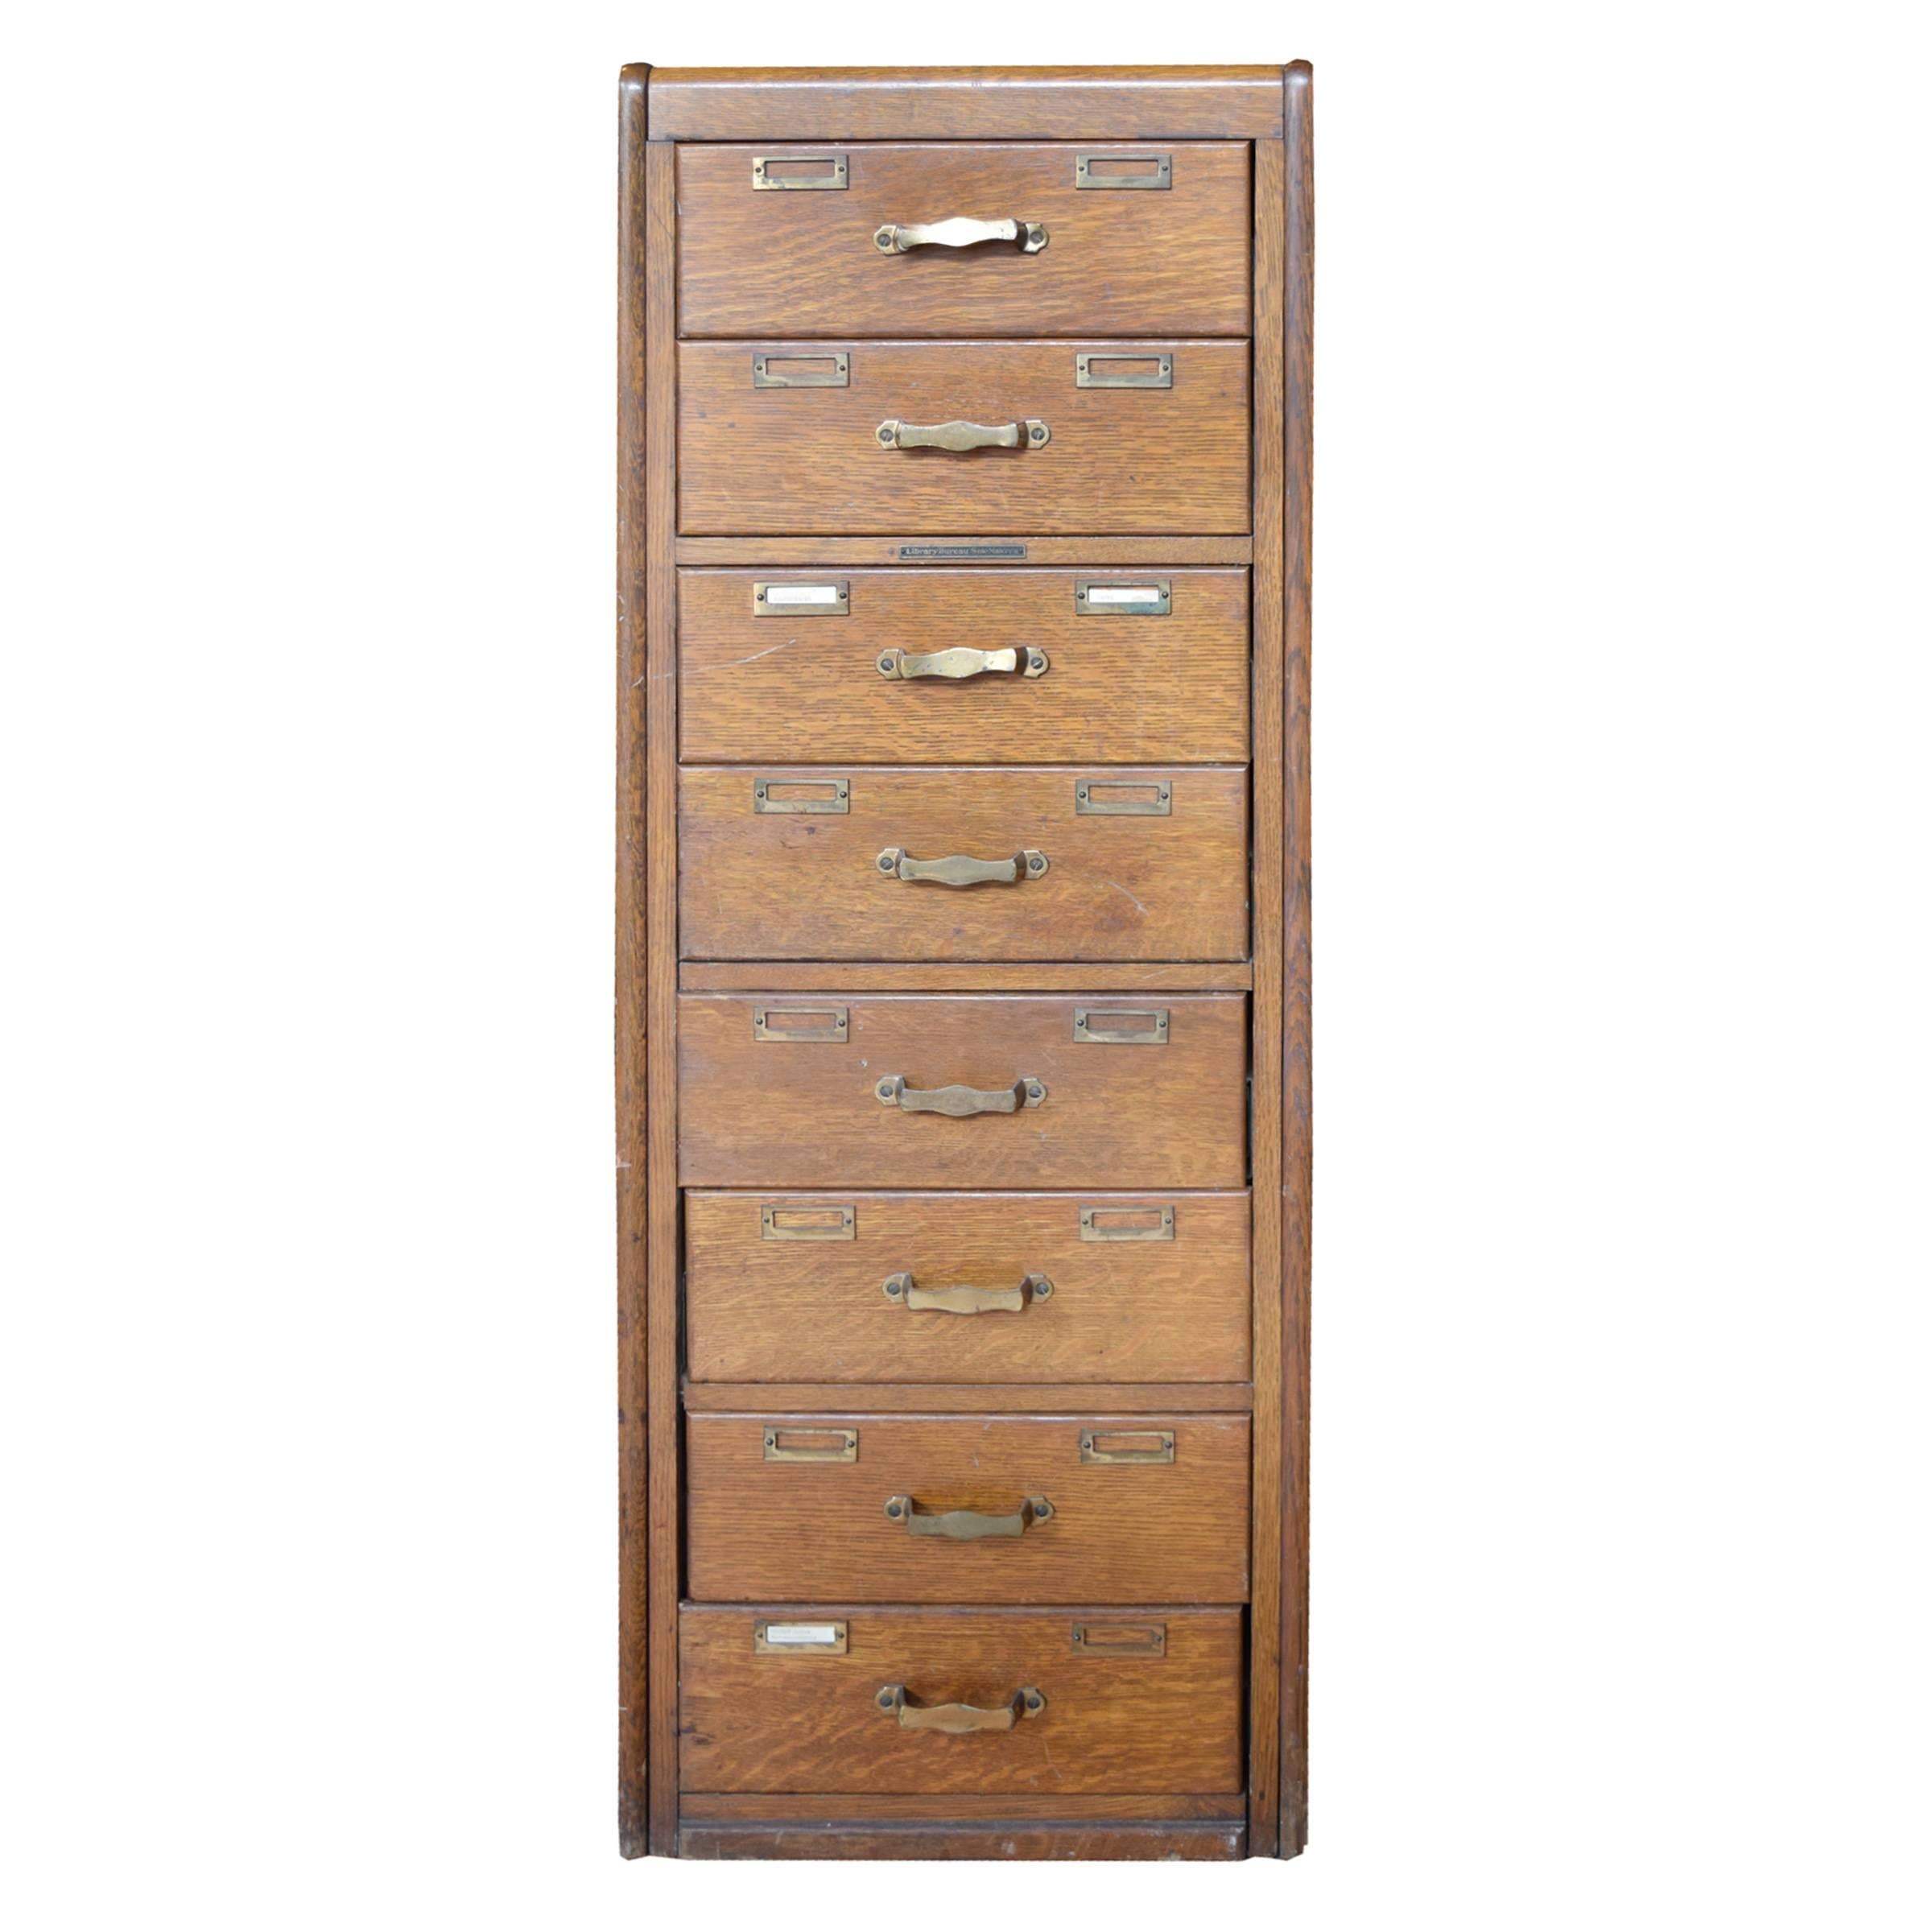 An American eight-drawer oak filing cabinet manufactured by Library Bureau with paneled sides and back, rounded top corners and original brass handles and card slots, circa 1910.